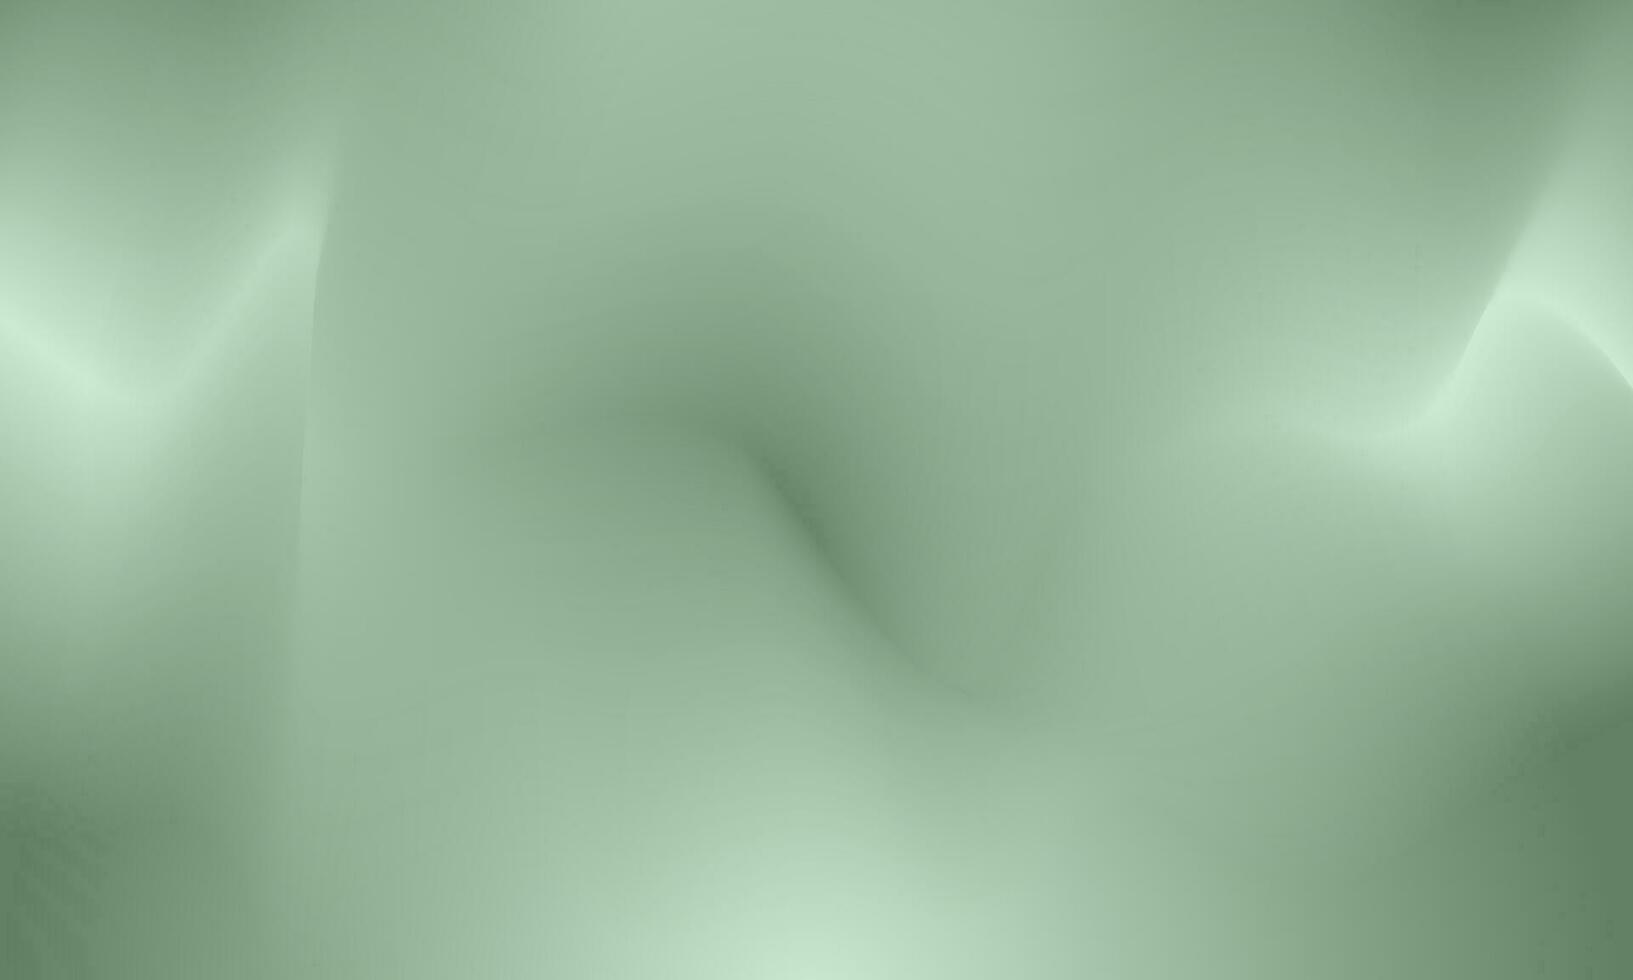 Abstract green gradient with grain noise effect background vector